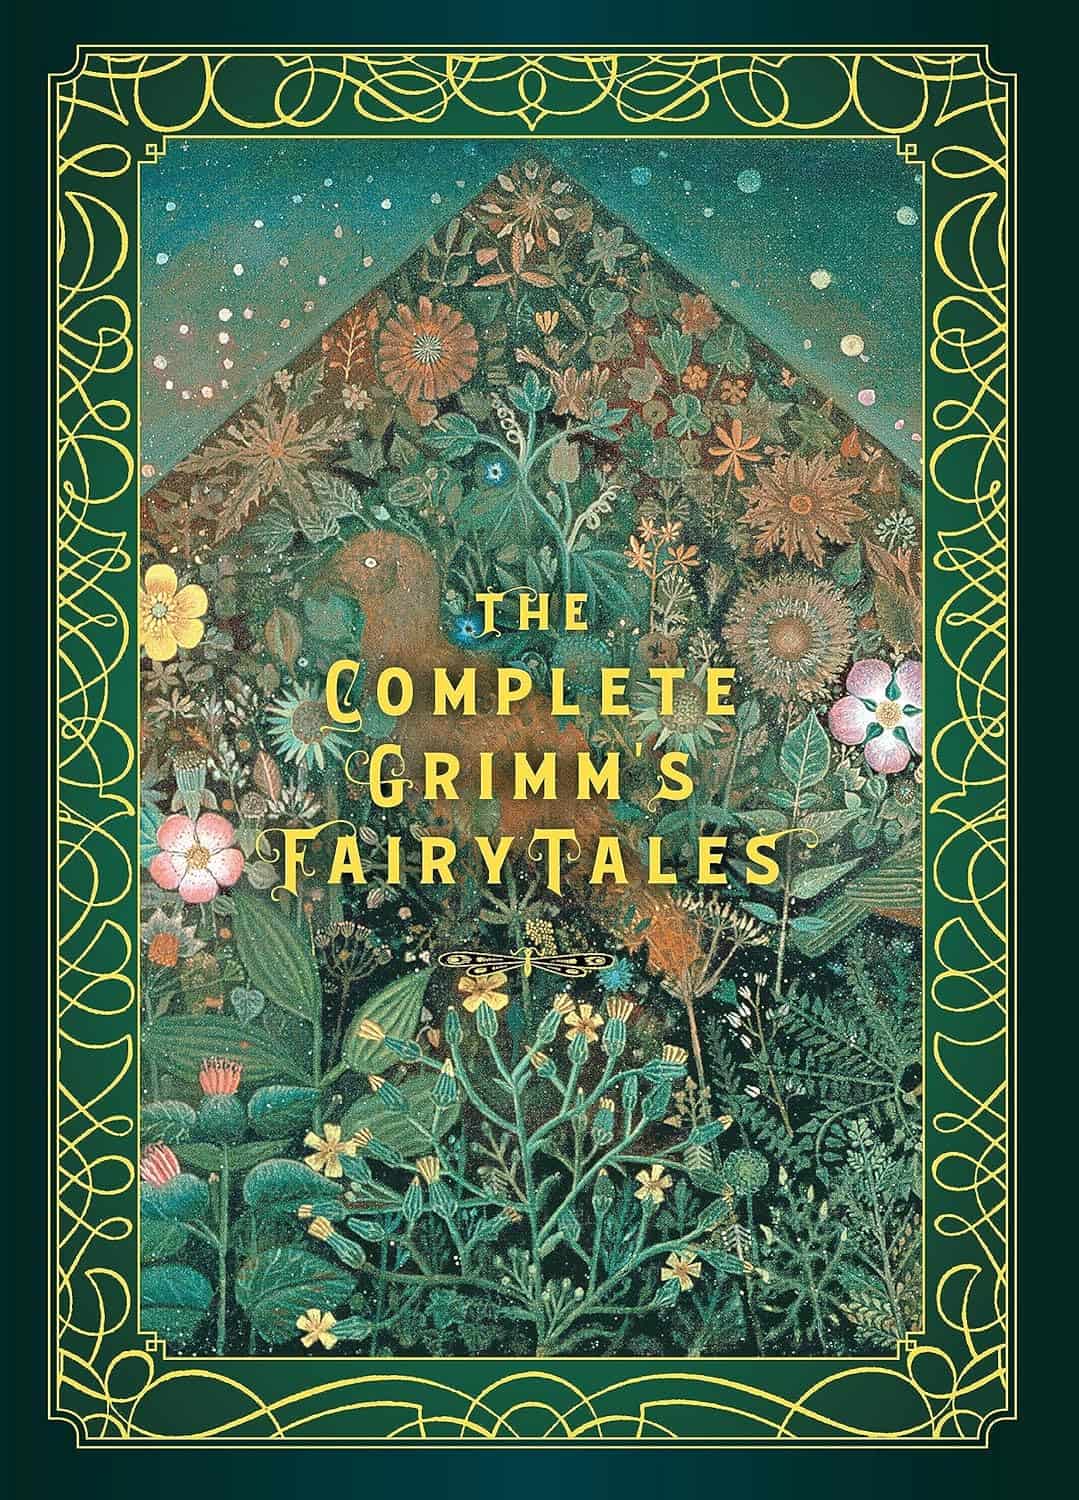 The Complete Grimm's Fairy Tales by the Brothers Grimm